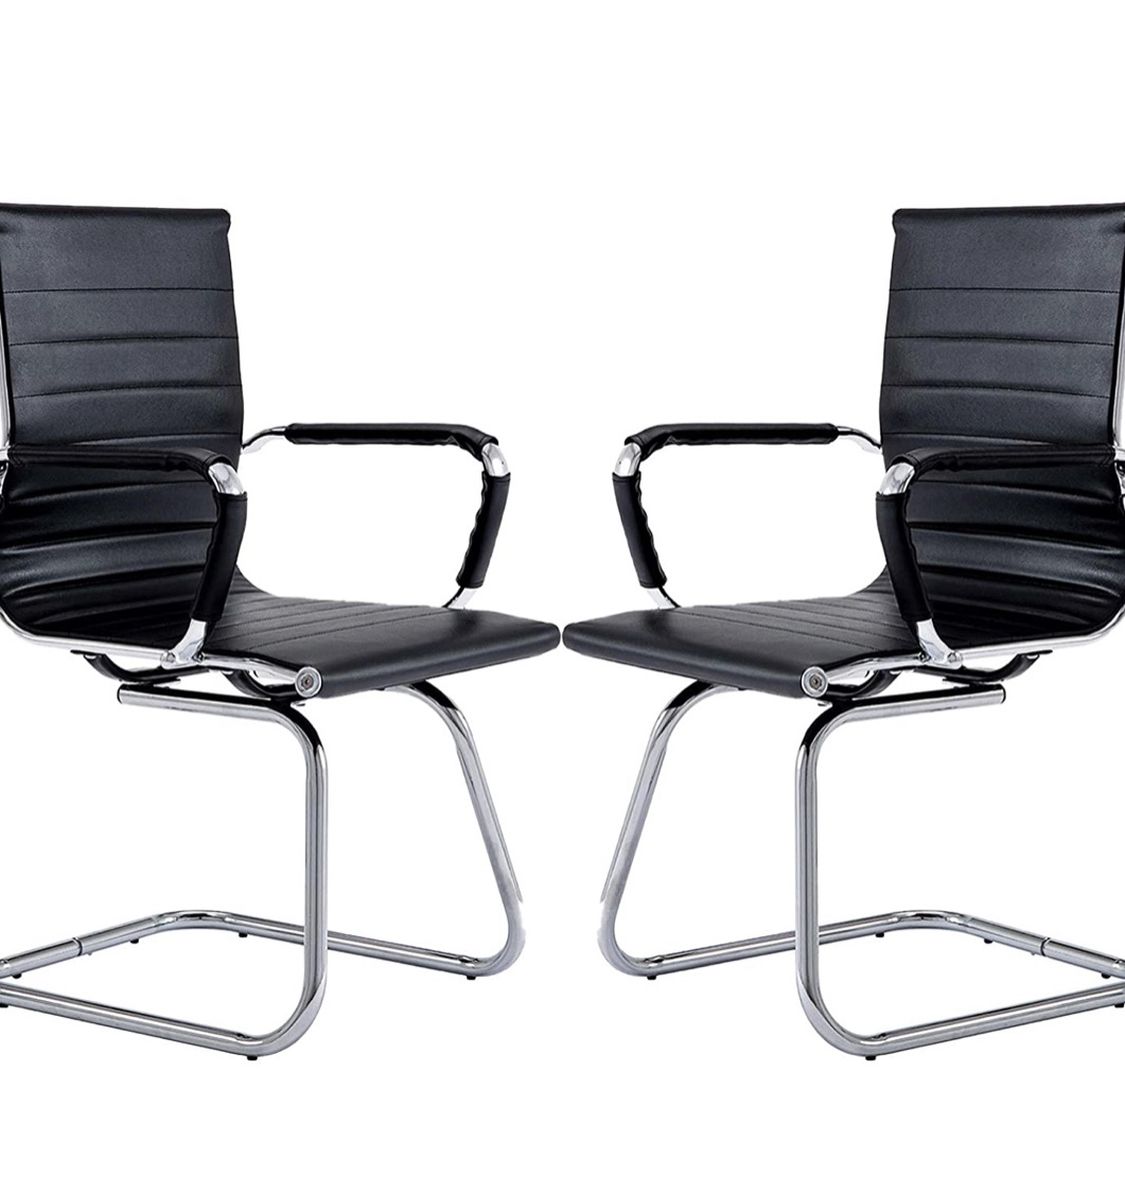 CoVibrant Modern Office Chair Without Wheels Waiting Room Chairs with Arms for Reception Desk Conference Area, Set of 2